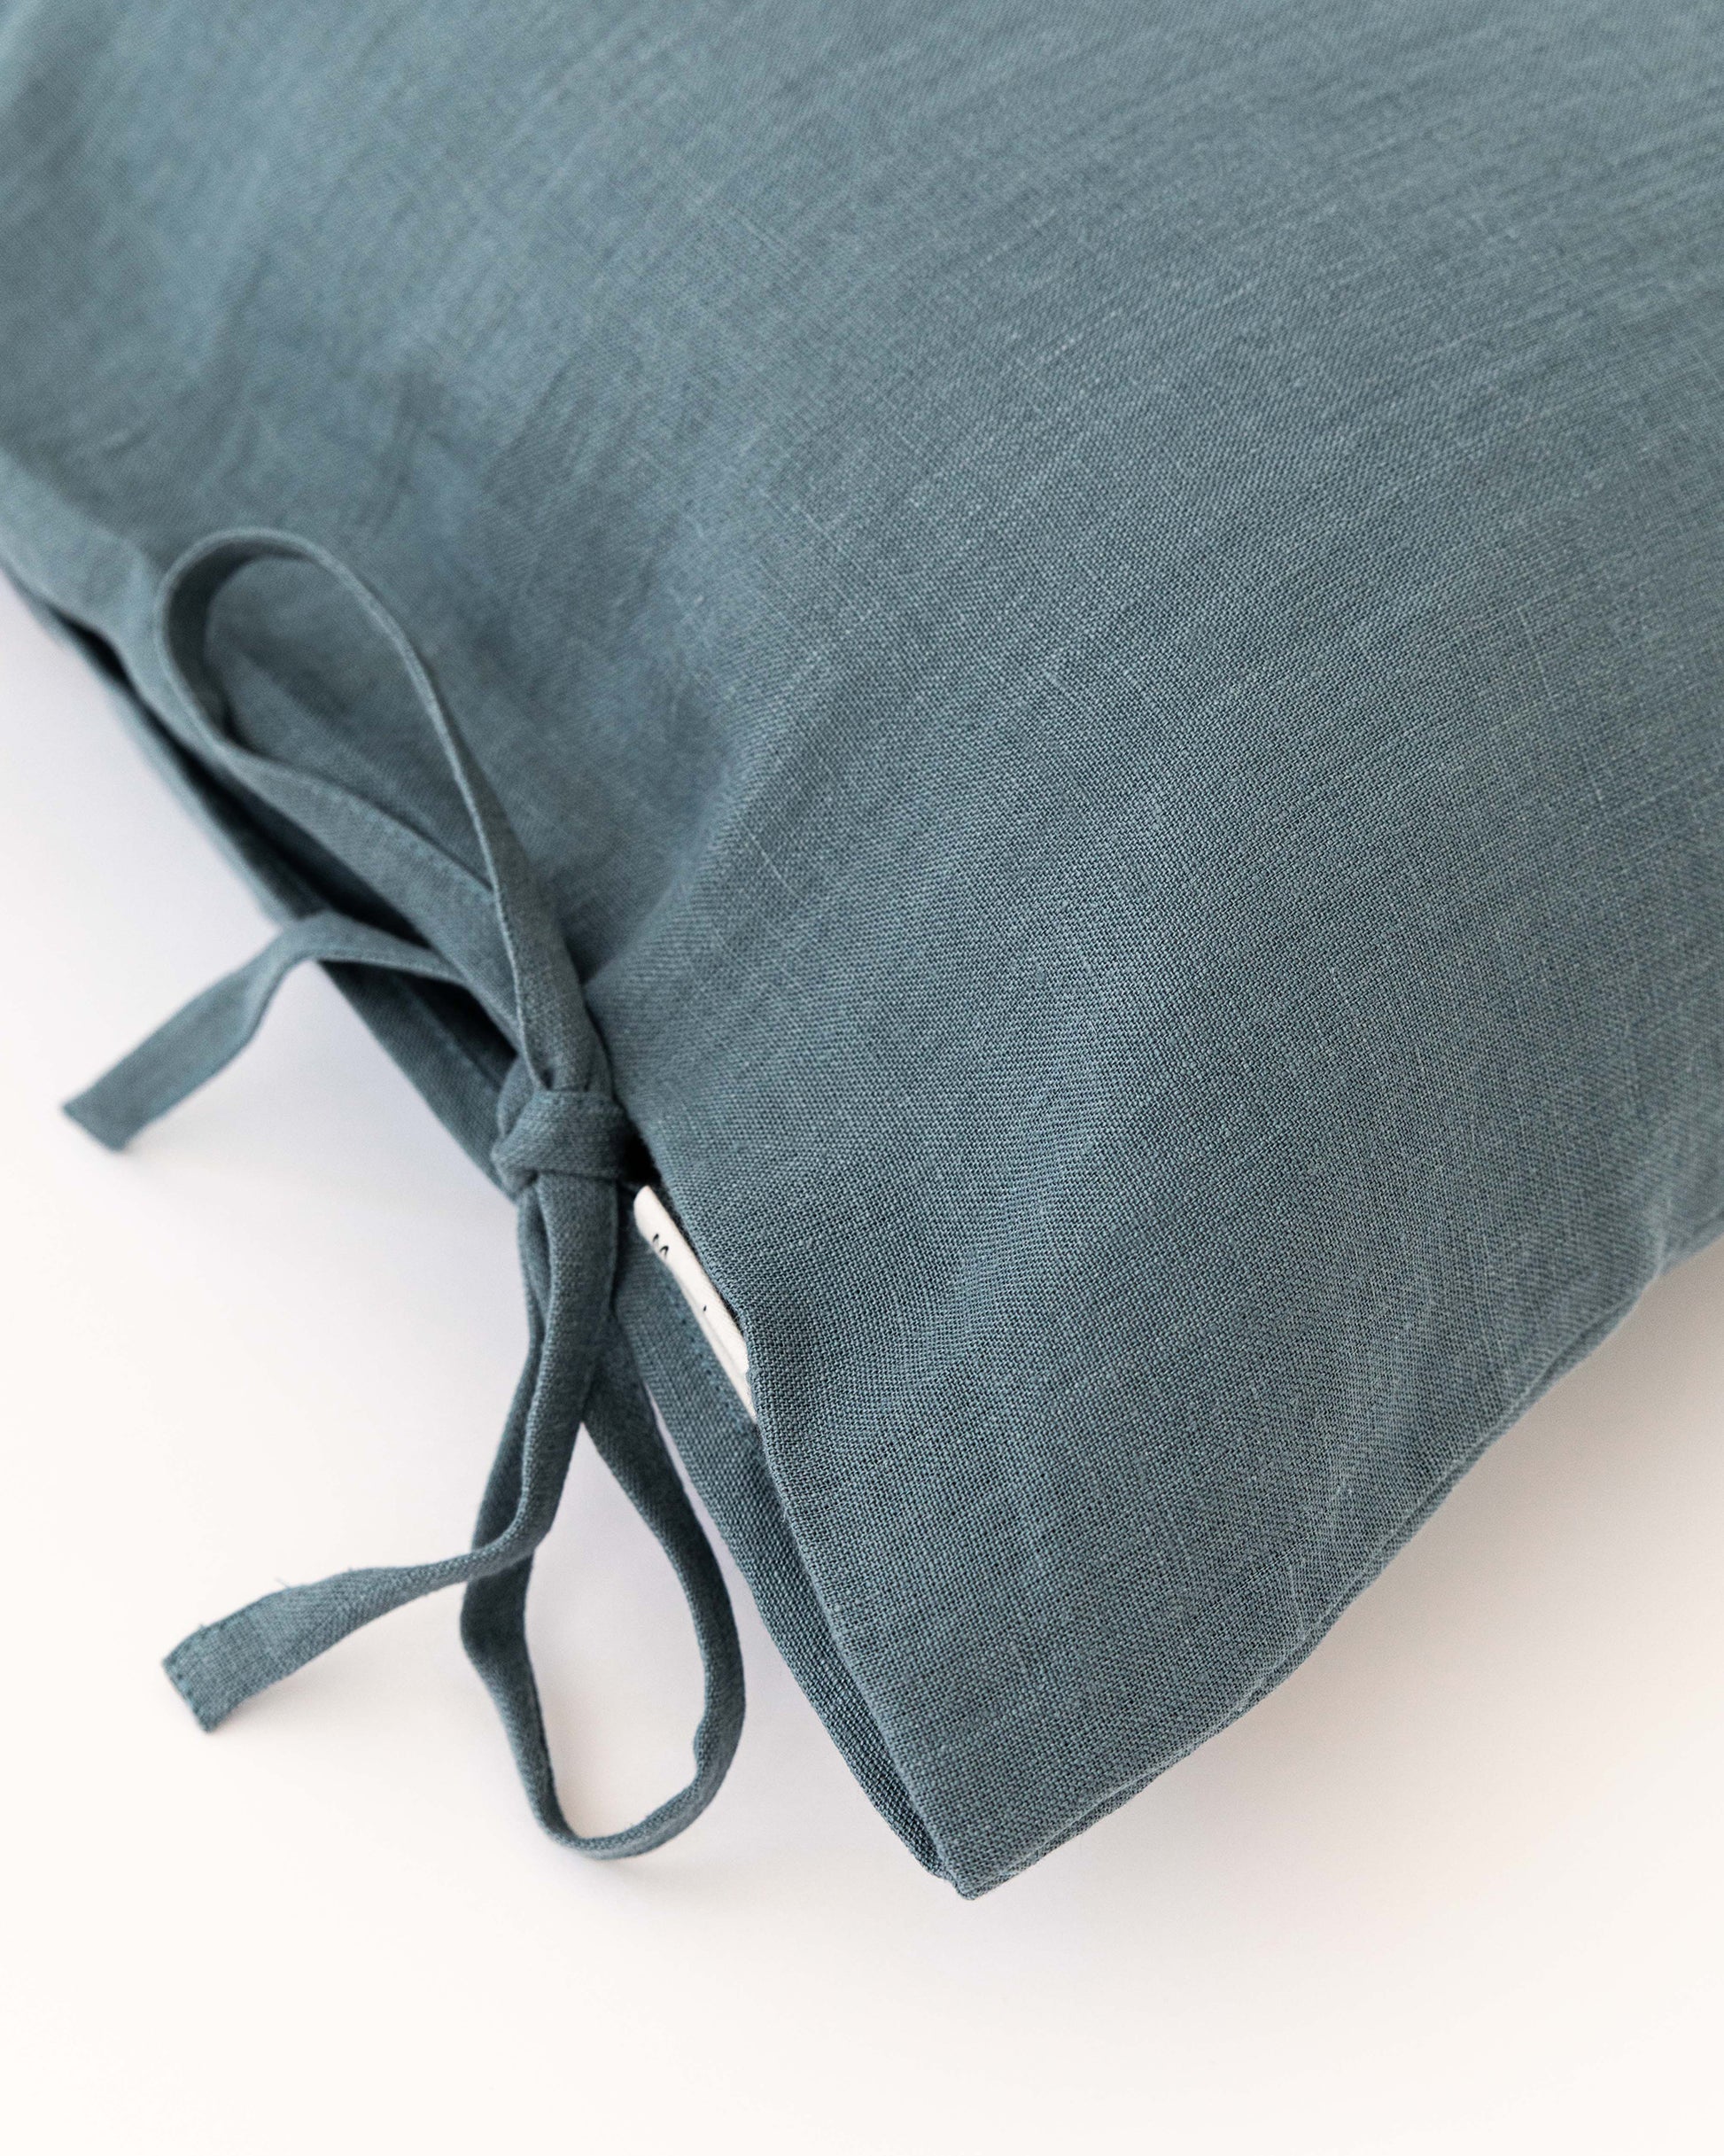 Linen pillowcase with ties in Gray blue - MagicLinen